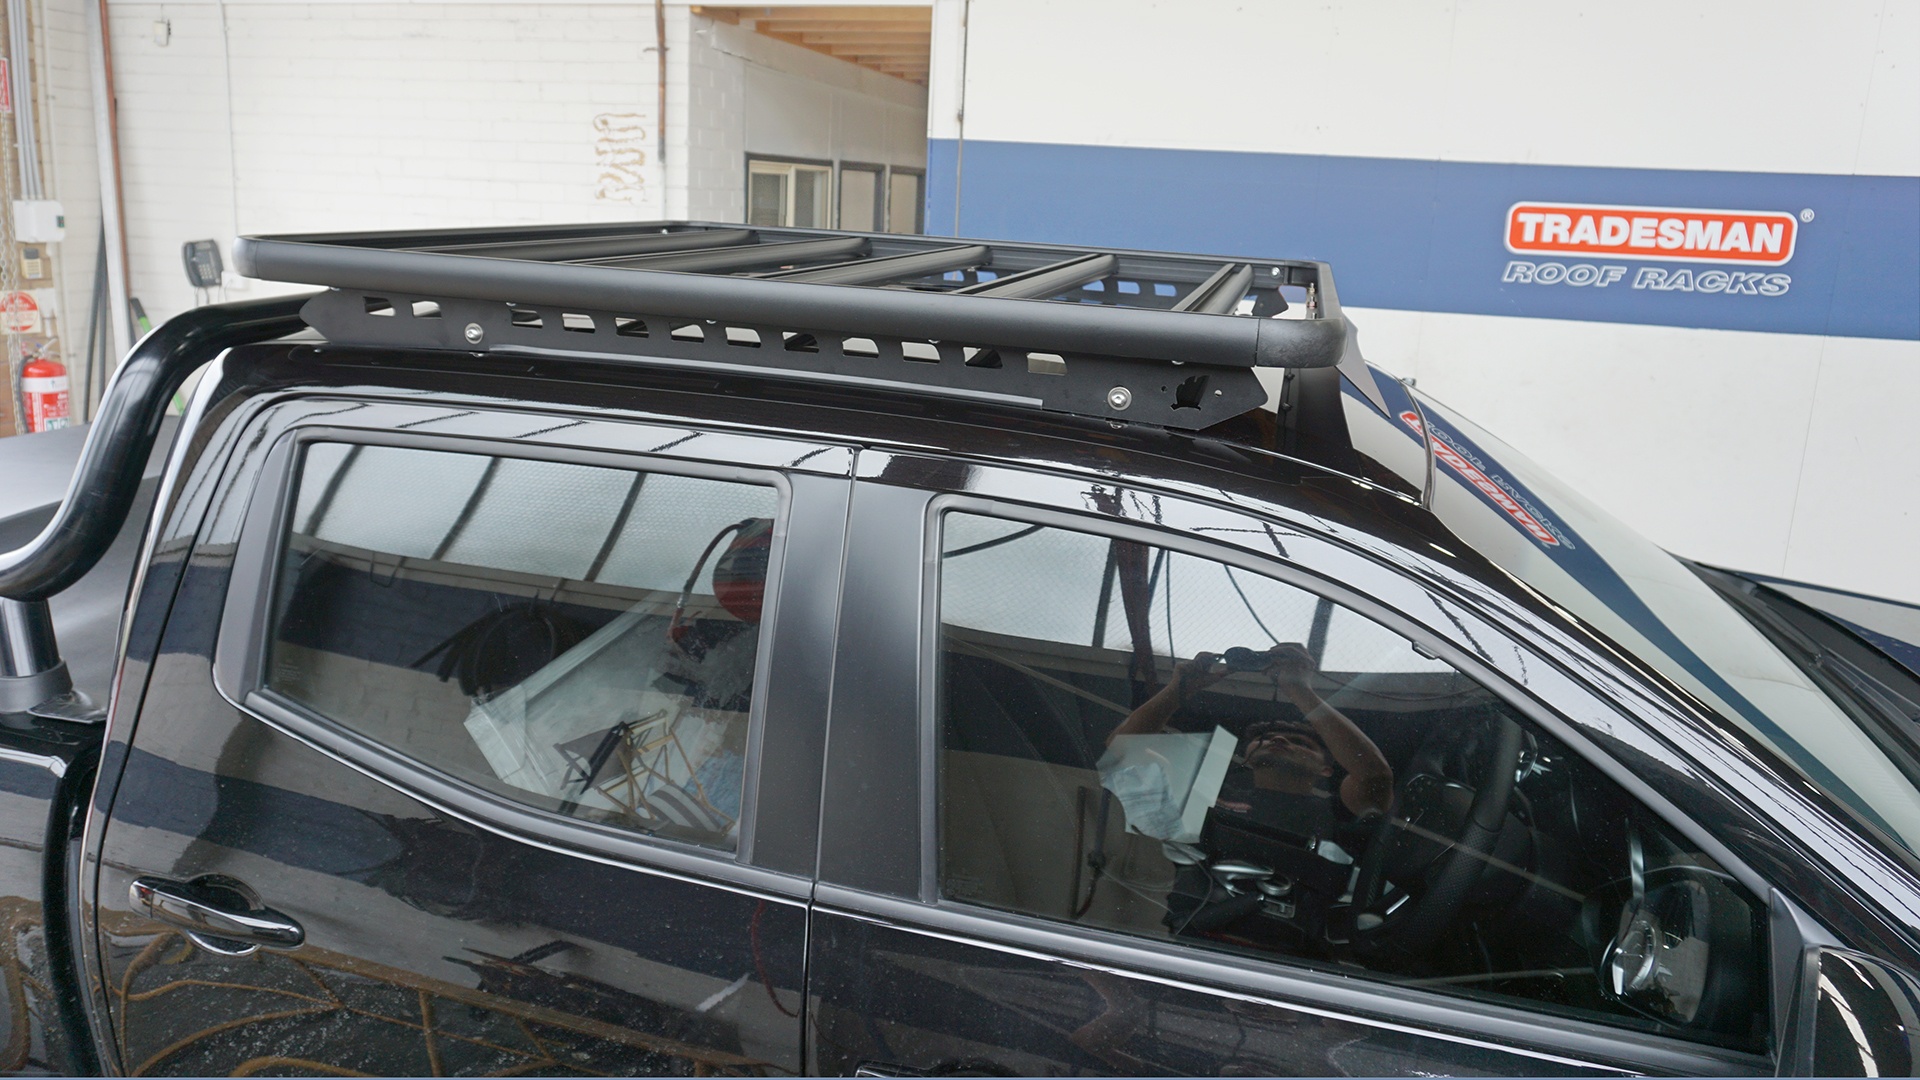 Raised side view of Navara with a Wedgetail roof rack installed showing the one piece mounting rails and the five cross bards used in the construction of the platform.